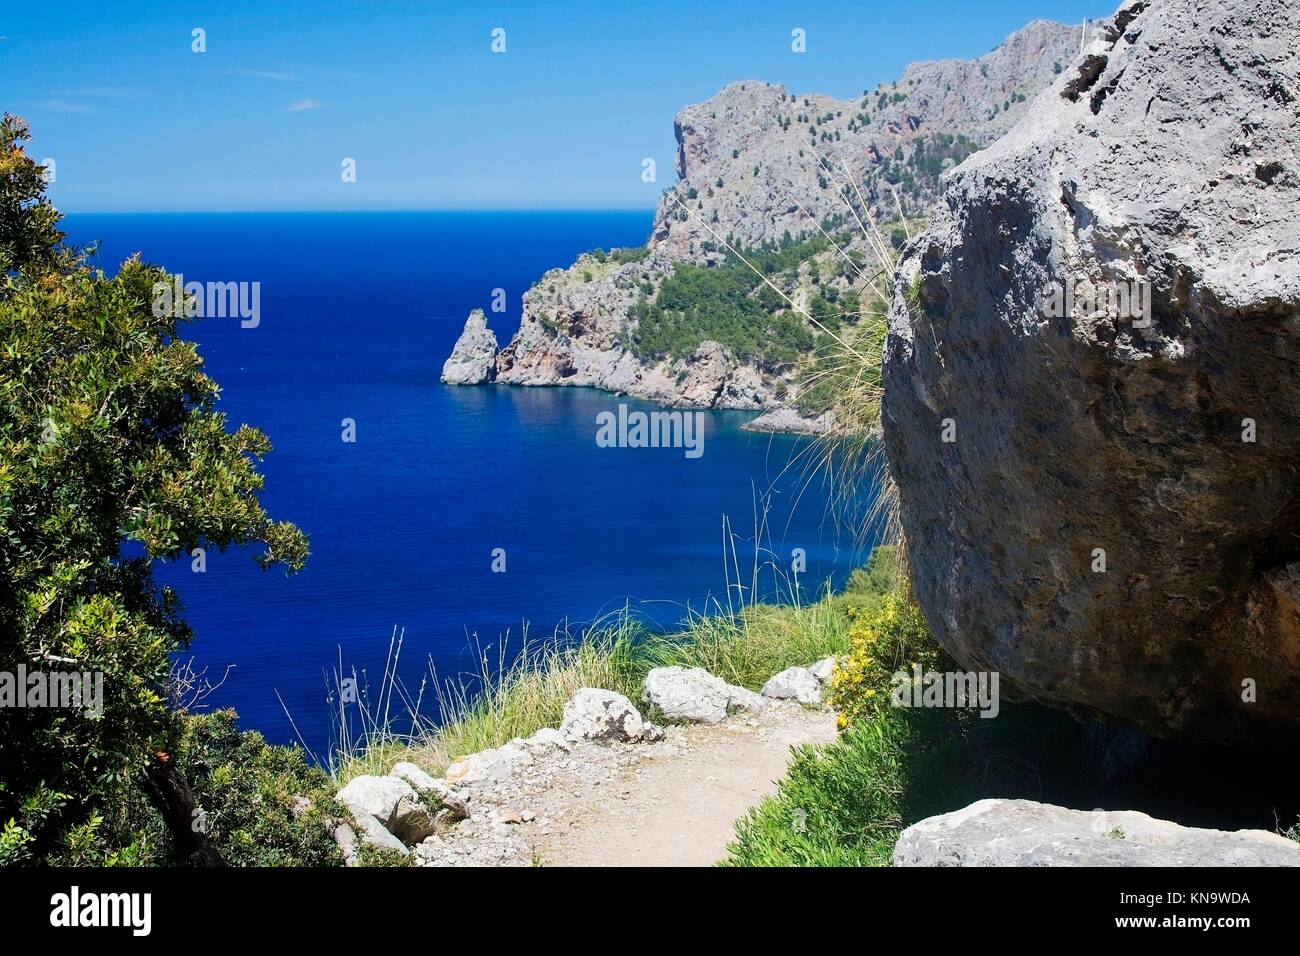 Walking path nature landscape view in Tramuntana mountains between Soller and Cala Tuent, Mallorca, Spain. Stock Photo